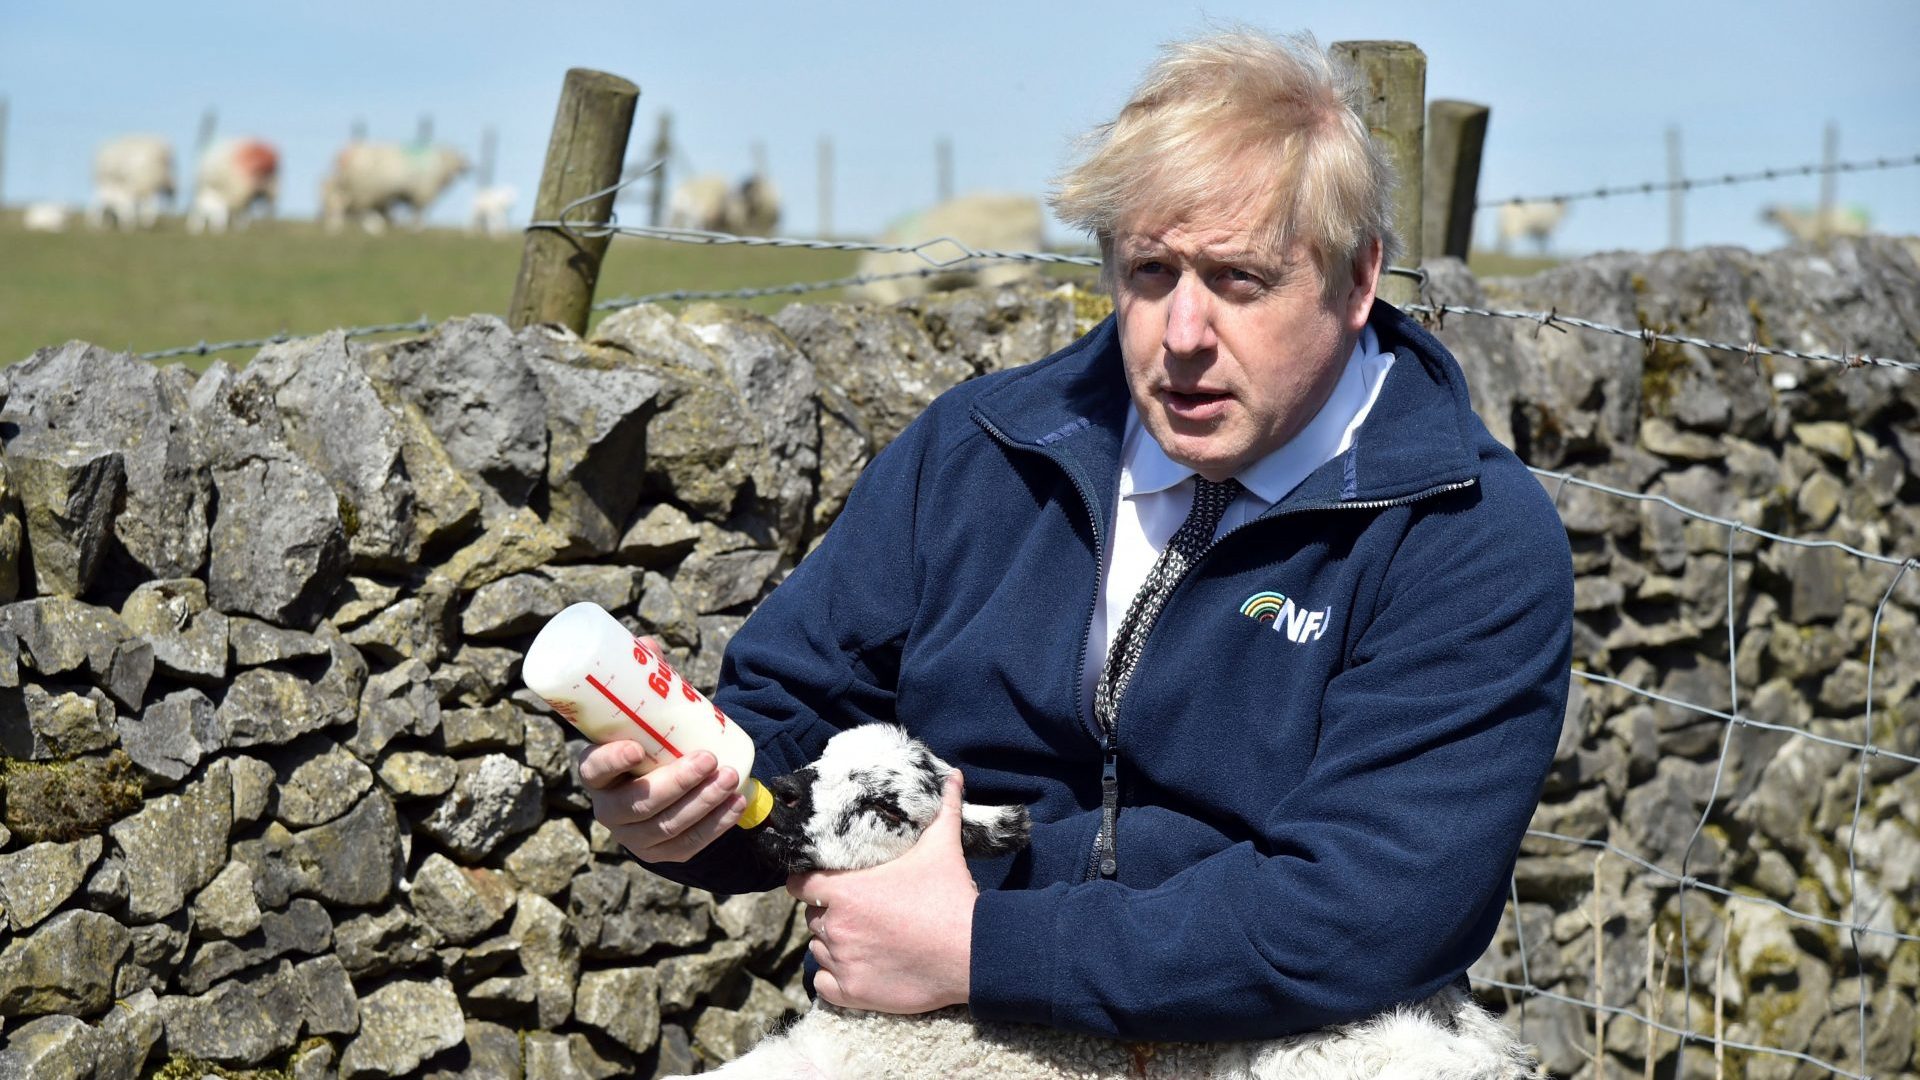 Boris Johnson visits a farm in April 2021 during the local election campaign. Small farms have been hit hard by reduced subsidies post-Brexit. Photo: Rui Vieira/AFP/Getty